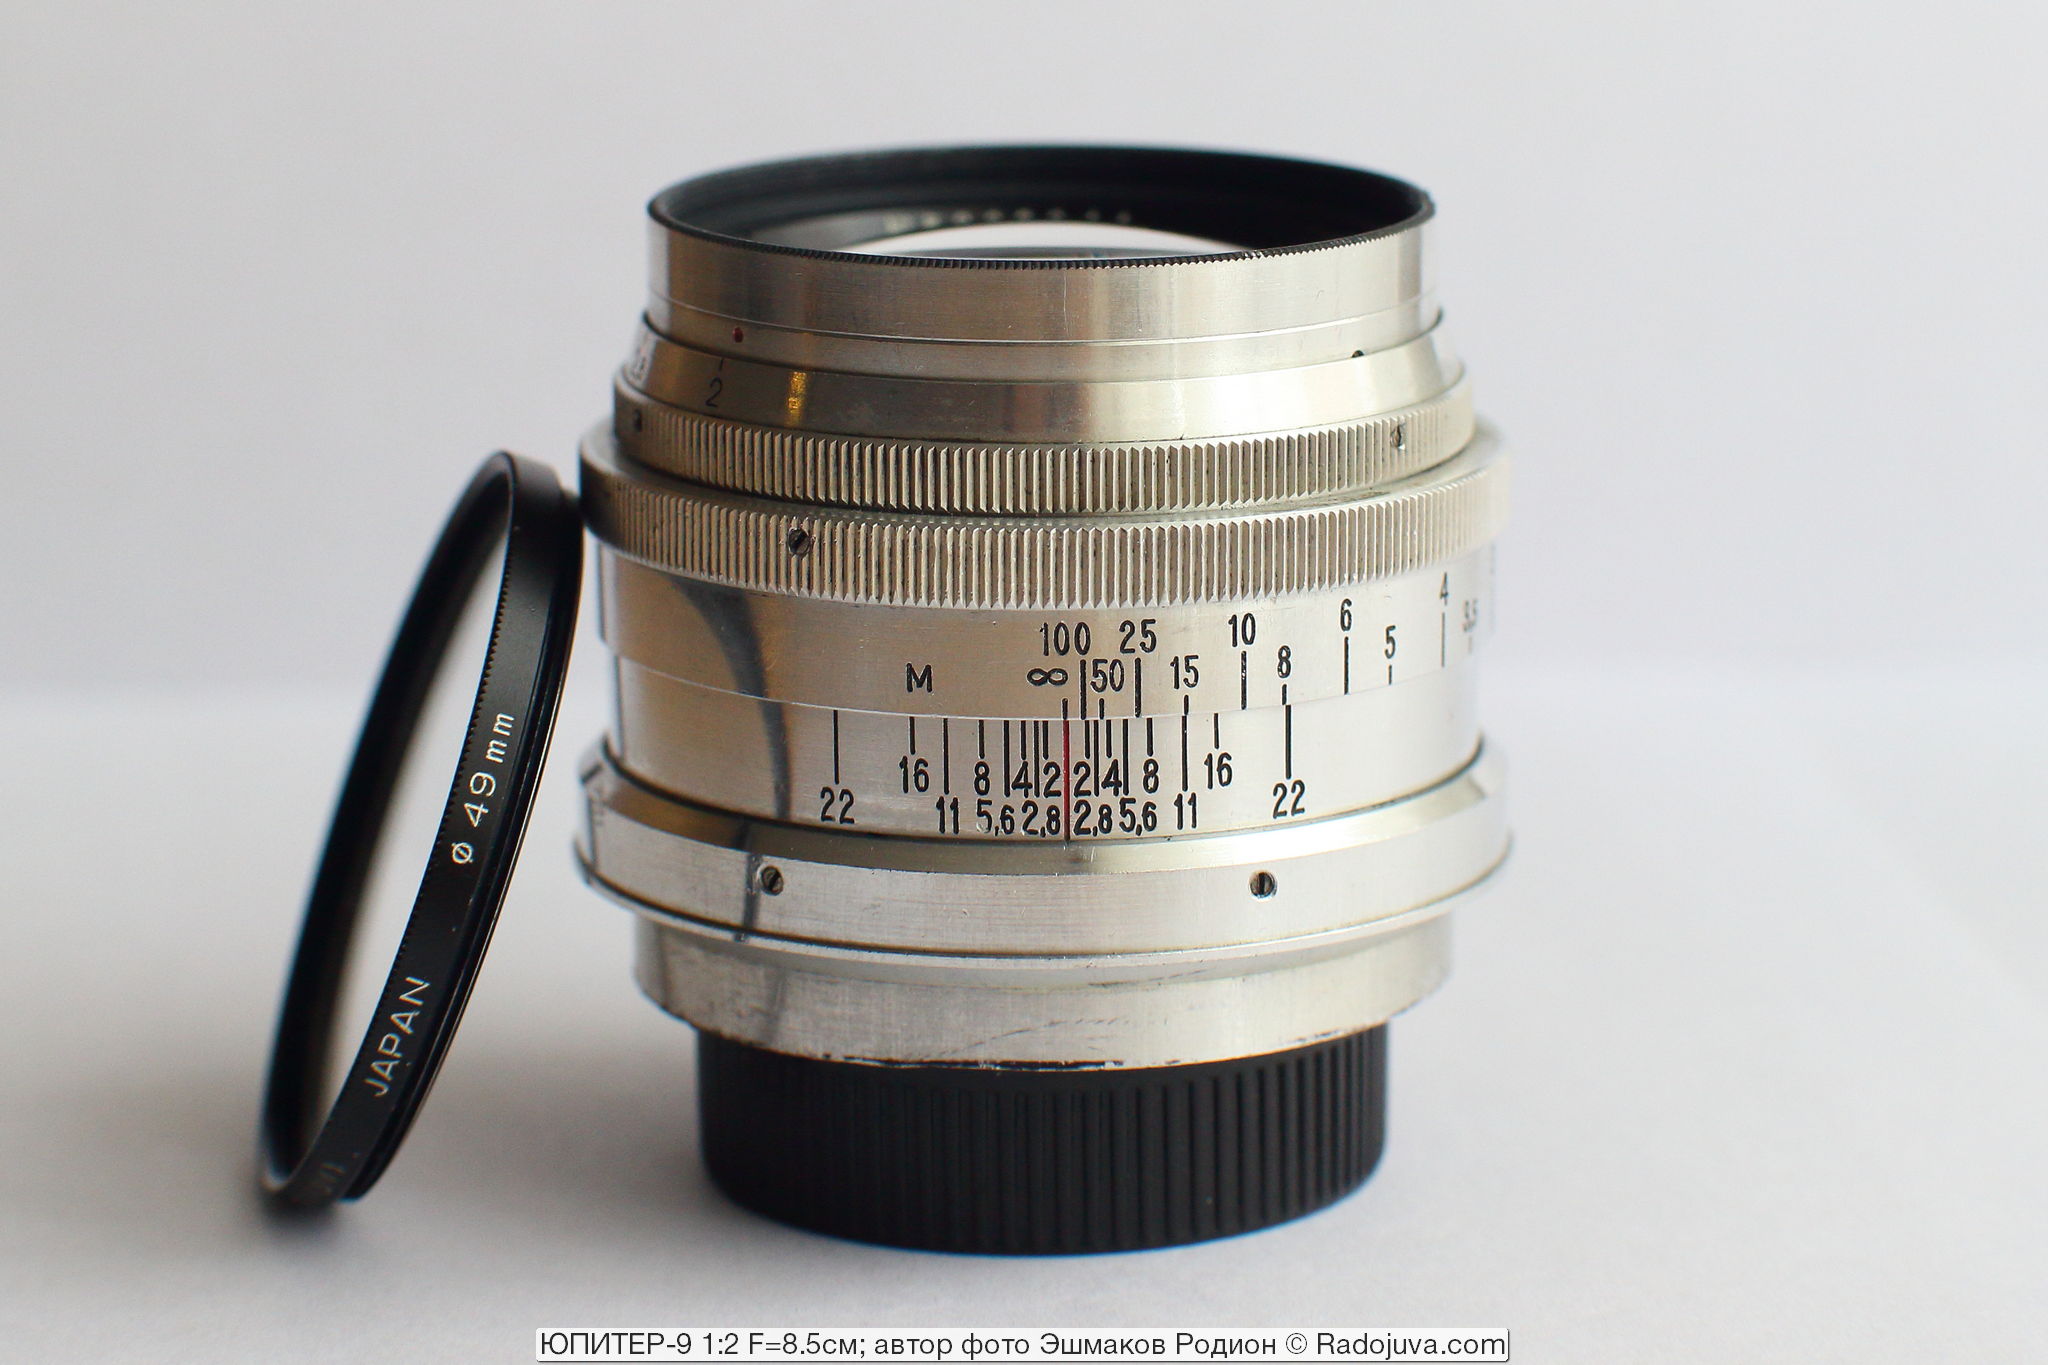 Overview of the Jupiter-9 85/2 lens (KMZ, 1959), adapted for mounting the M42 from the Contact-Kiev mount